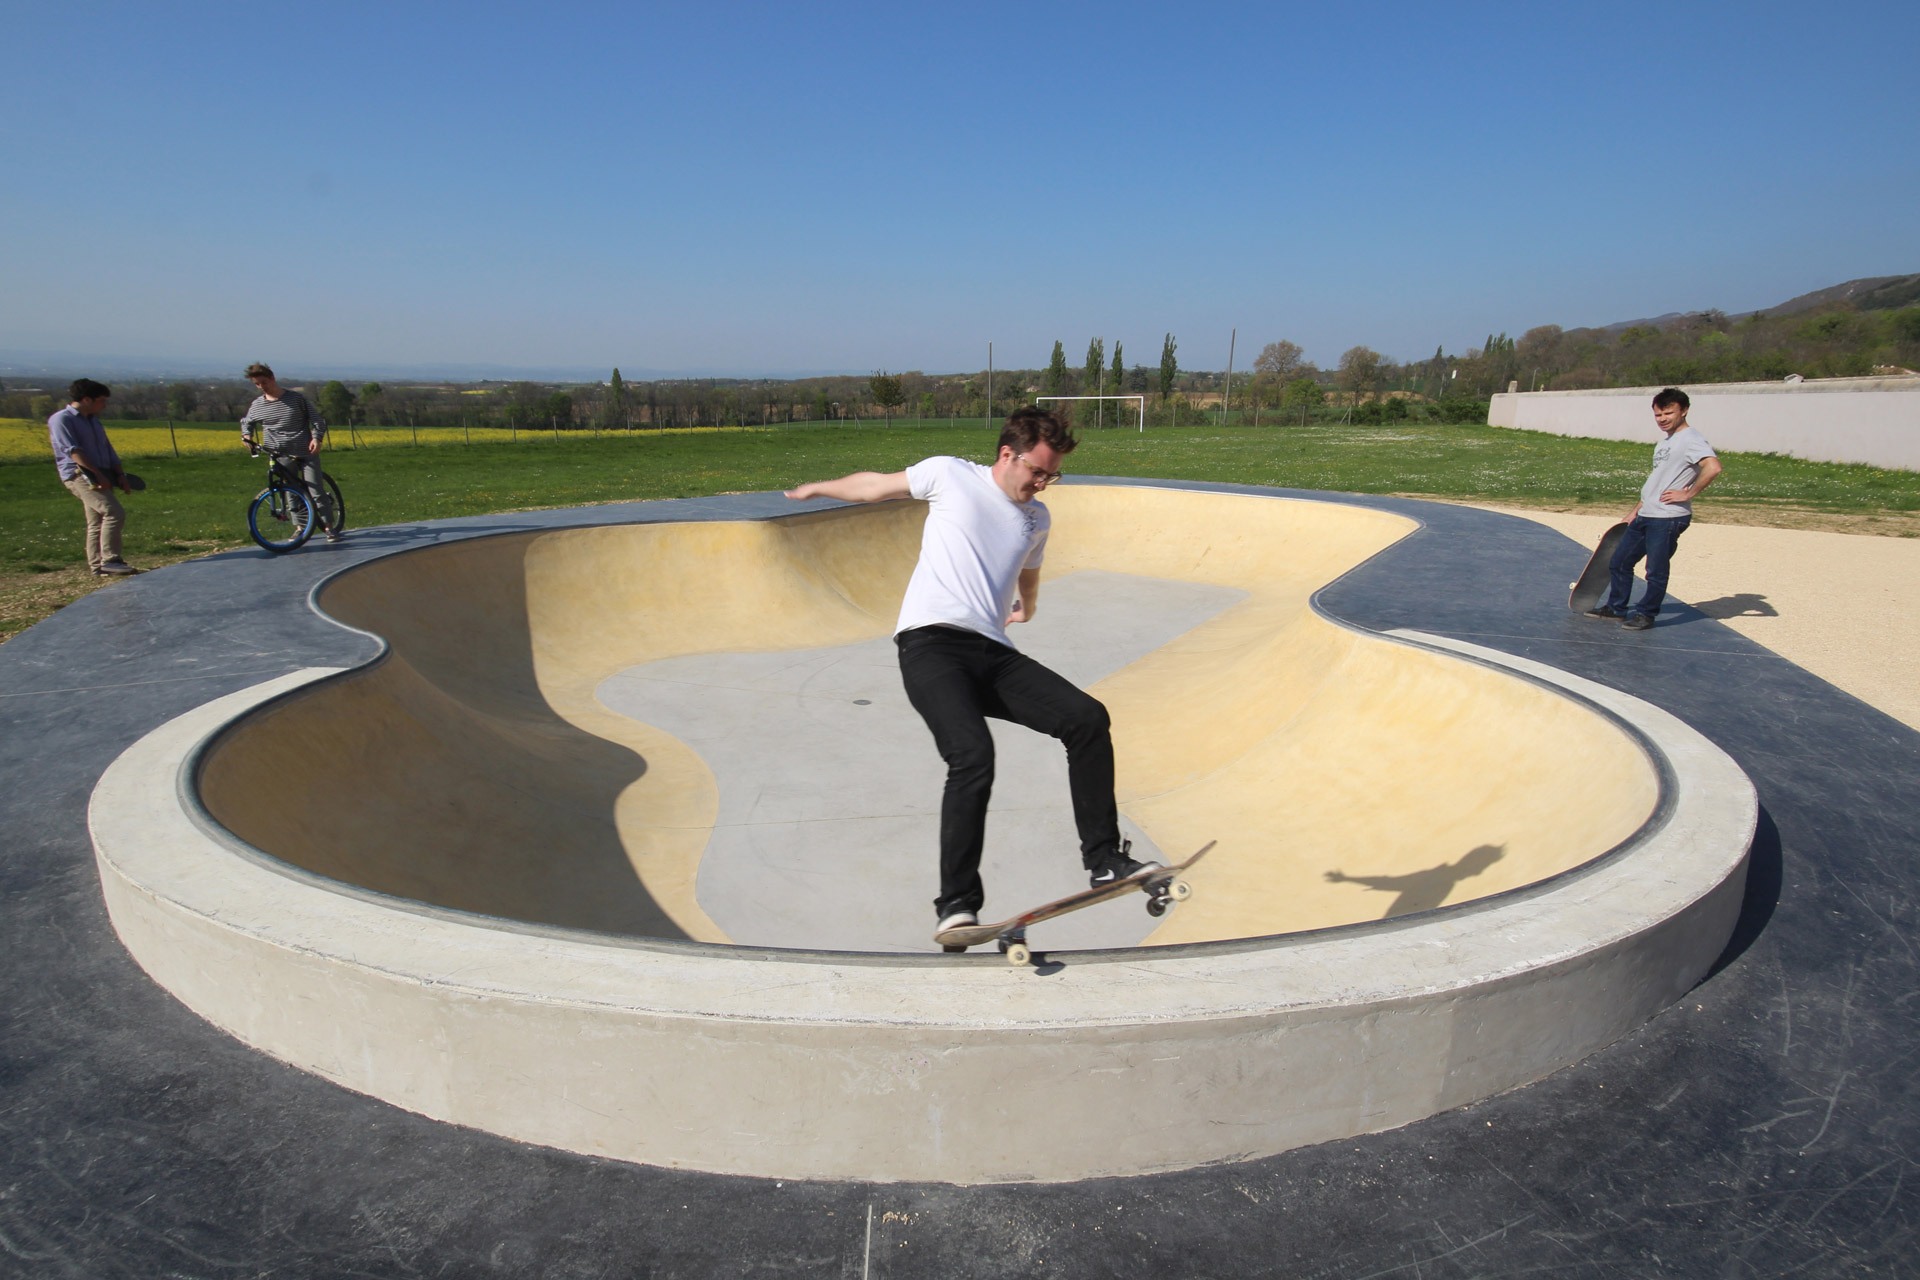 CHATEAUDOUBLE skatepark